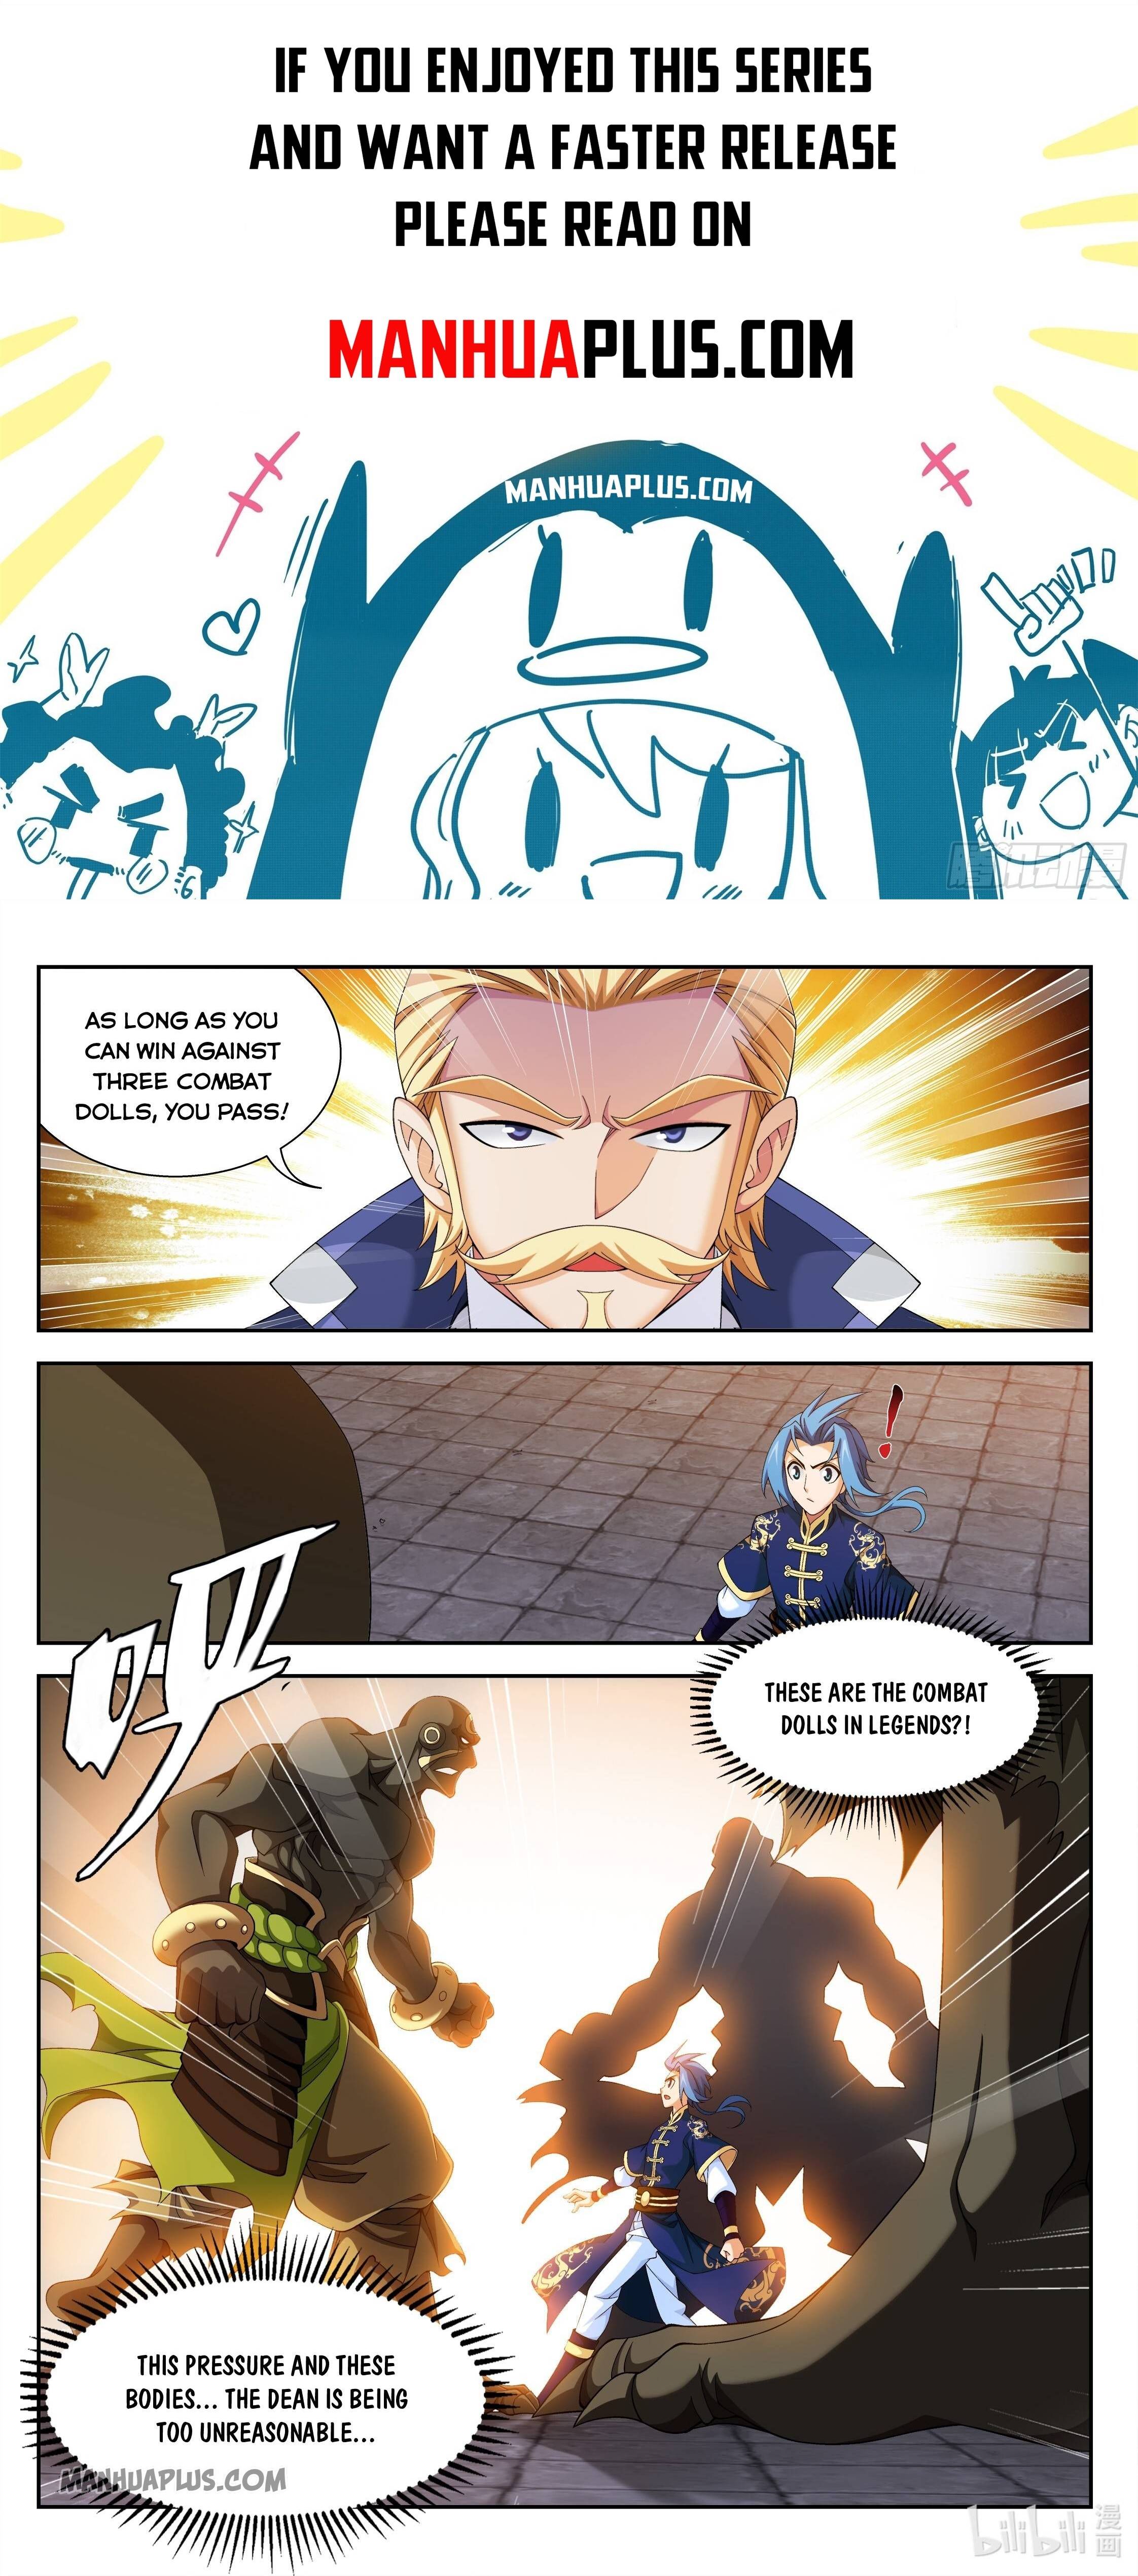 The Great Ruler - Page 1